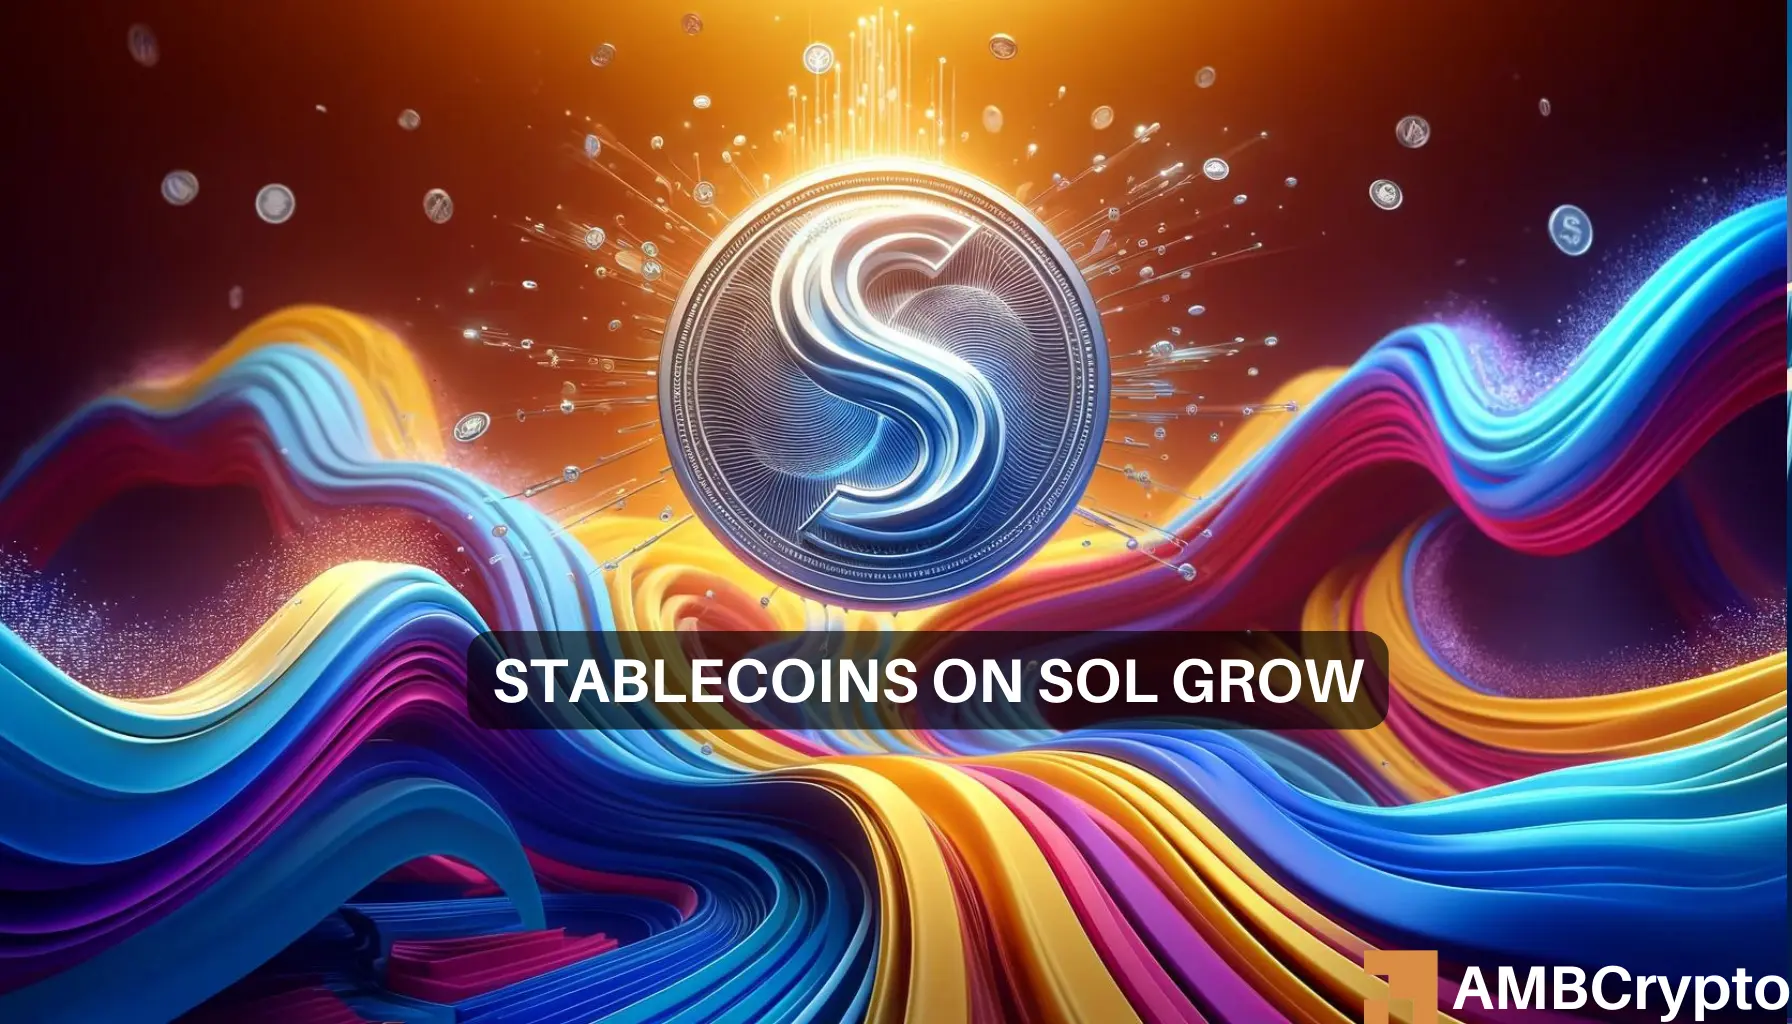 Solana 'beats' Ethereum on the stablecoins front, leaving SOL's price at...